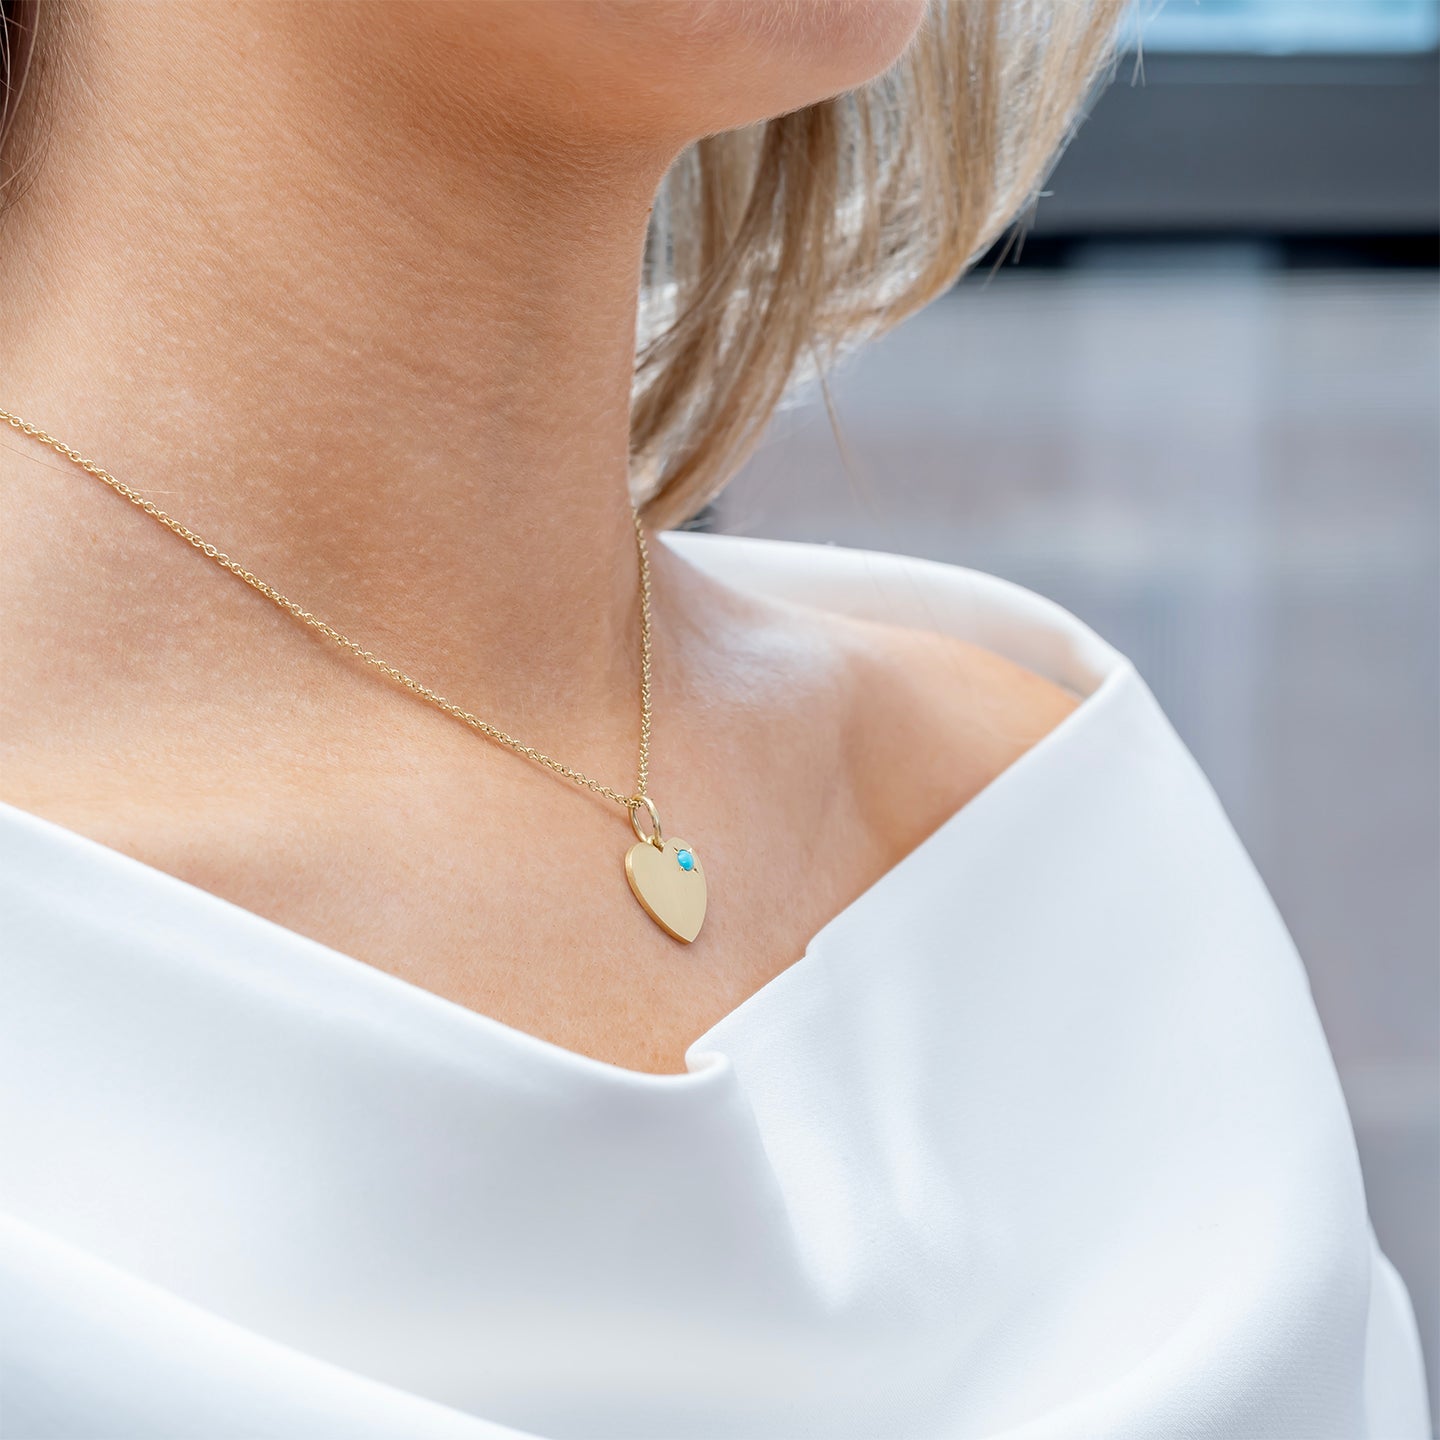 Irene Neuwirth Gold Classic 'Love' Pendant with Turquoise